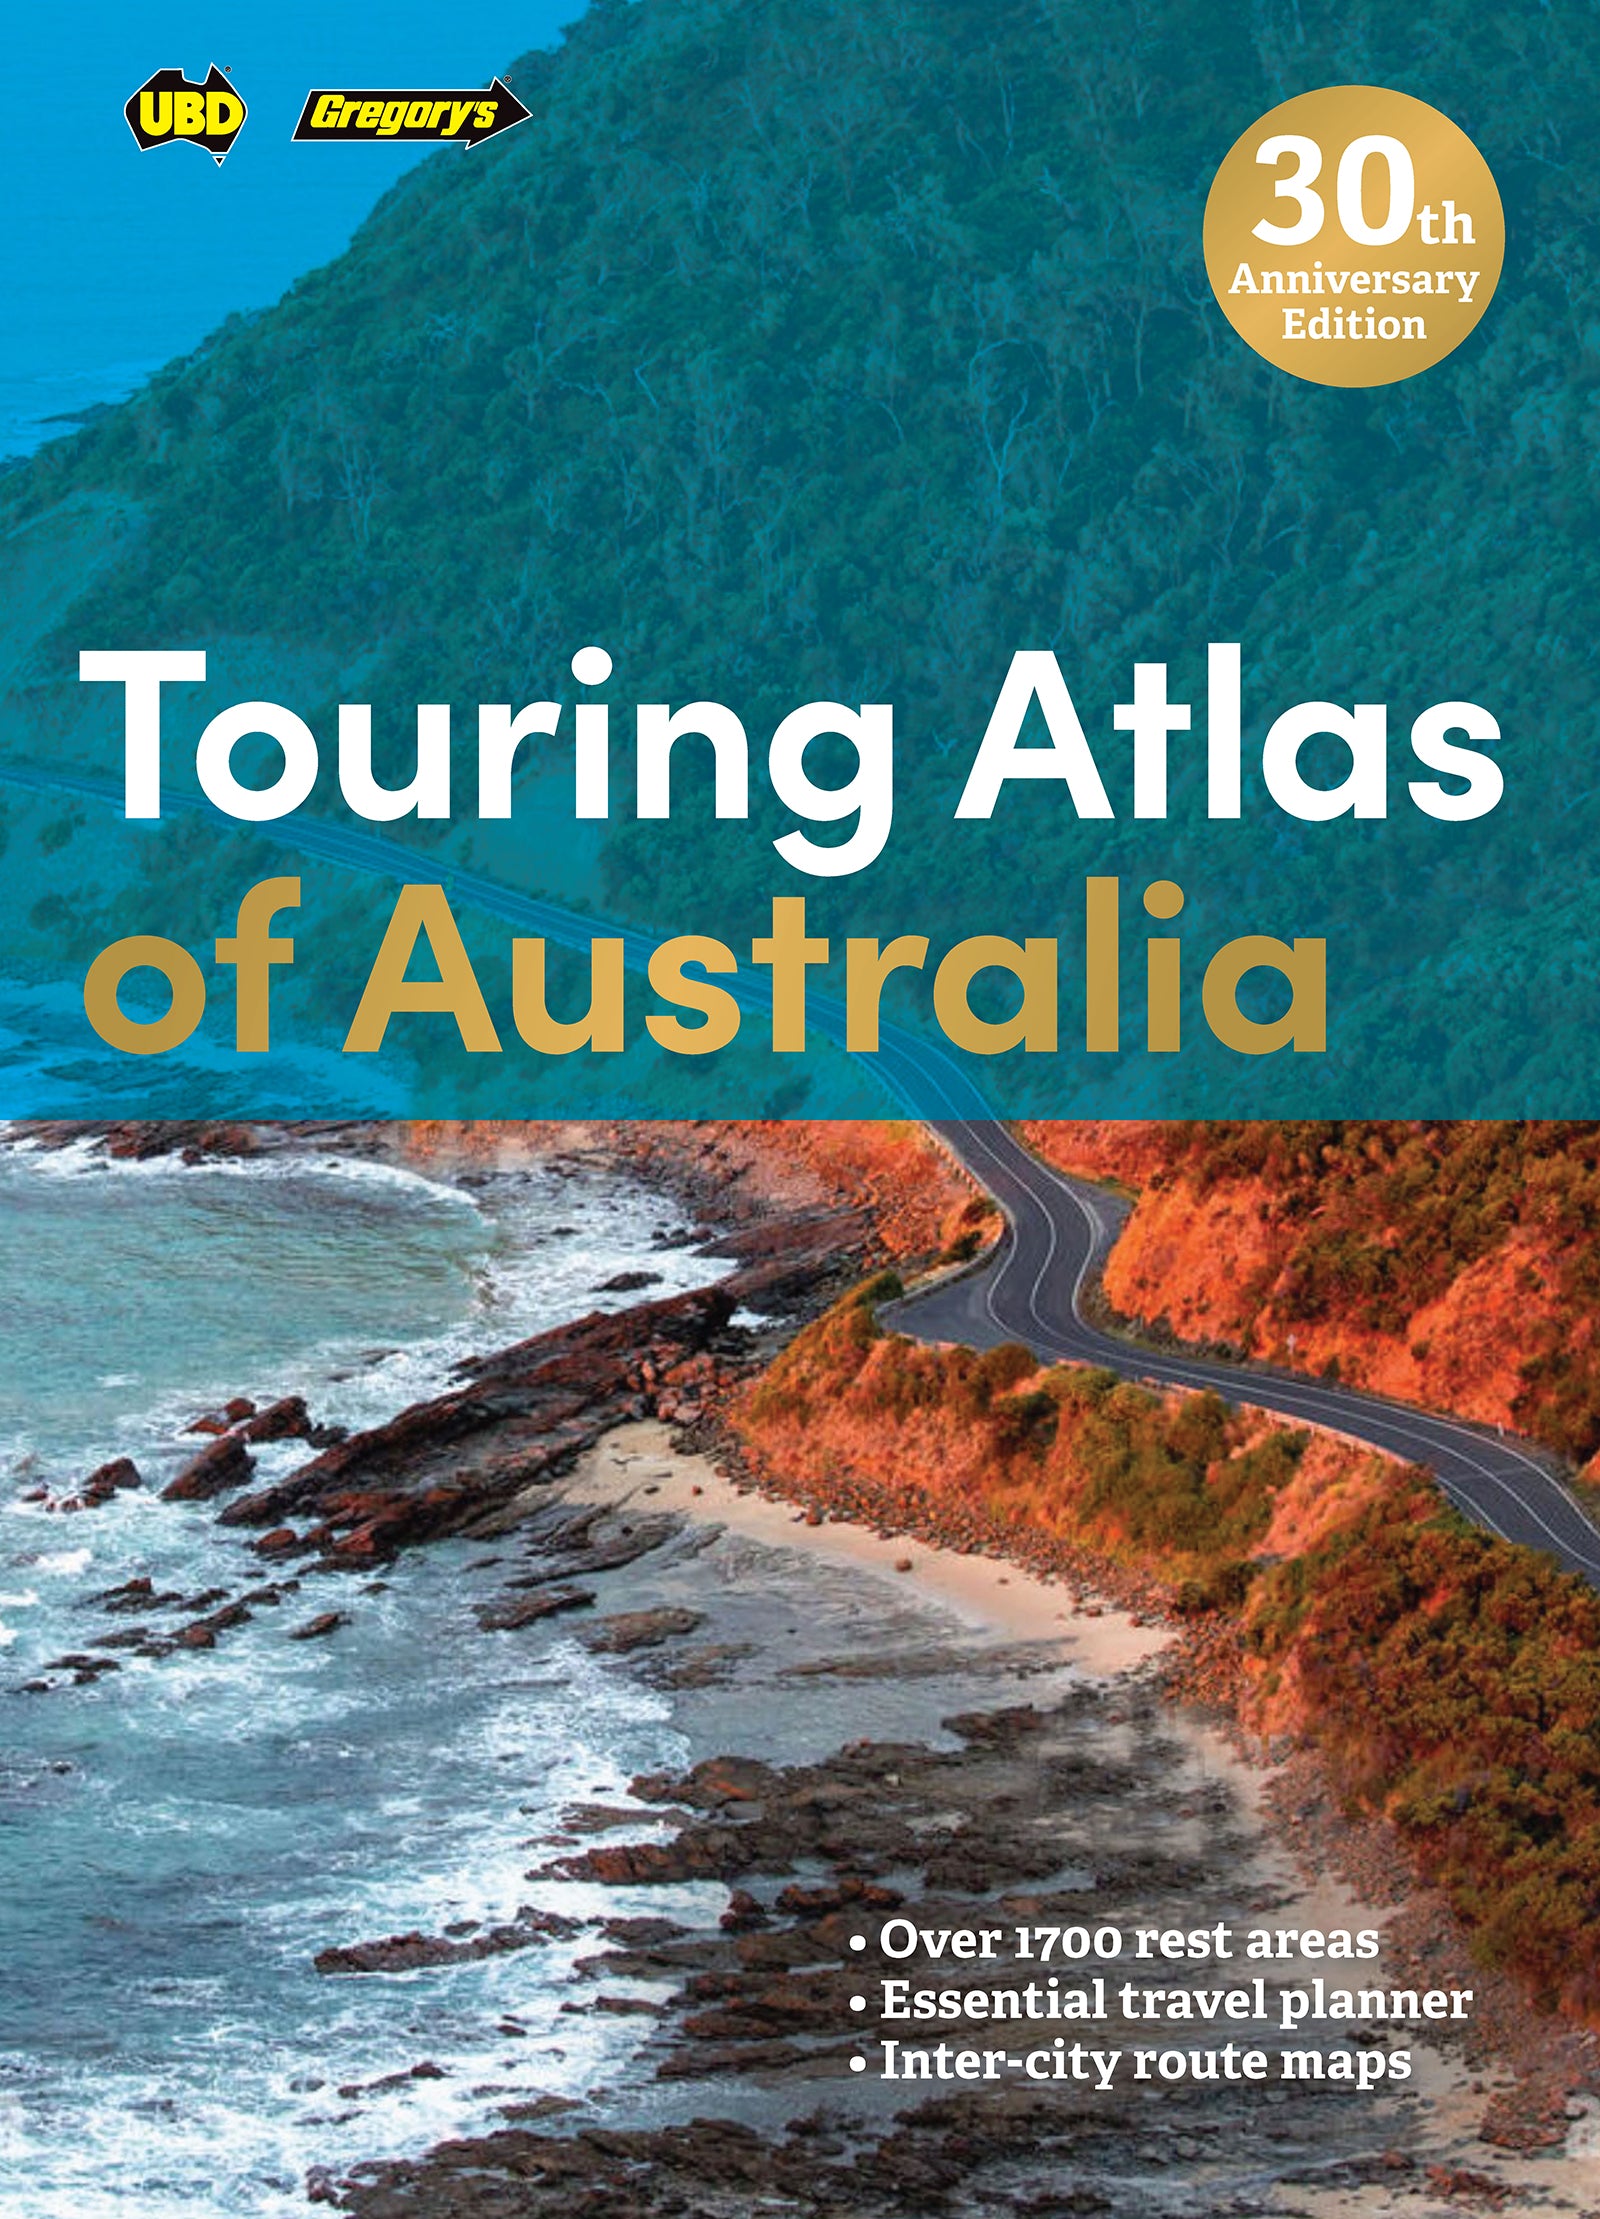 Touring Atlas of Australia by UBD Gregory's (30th Edition)